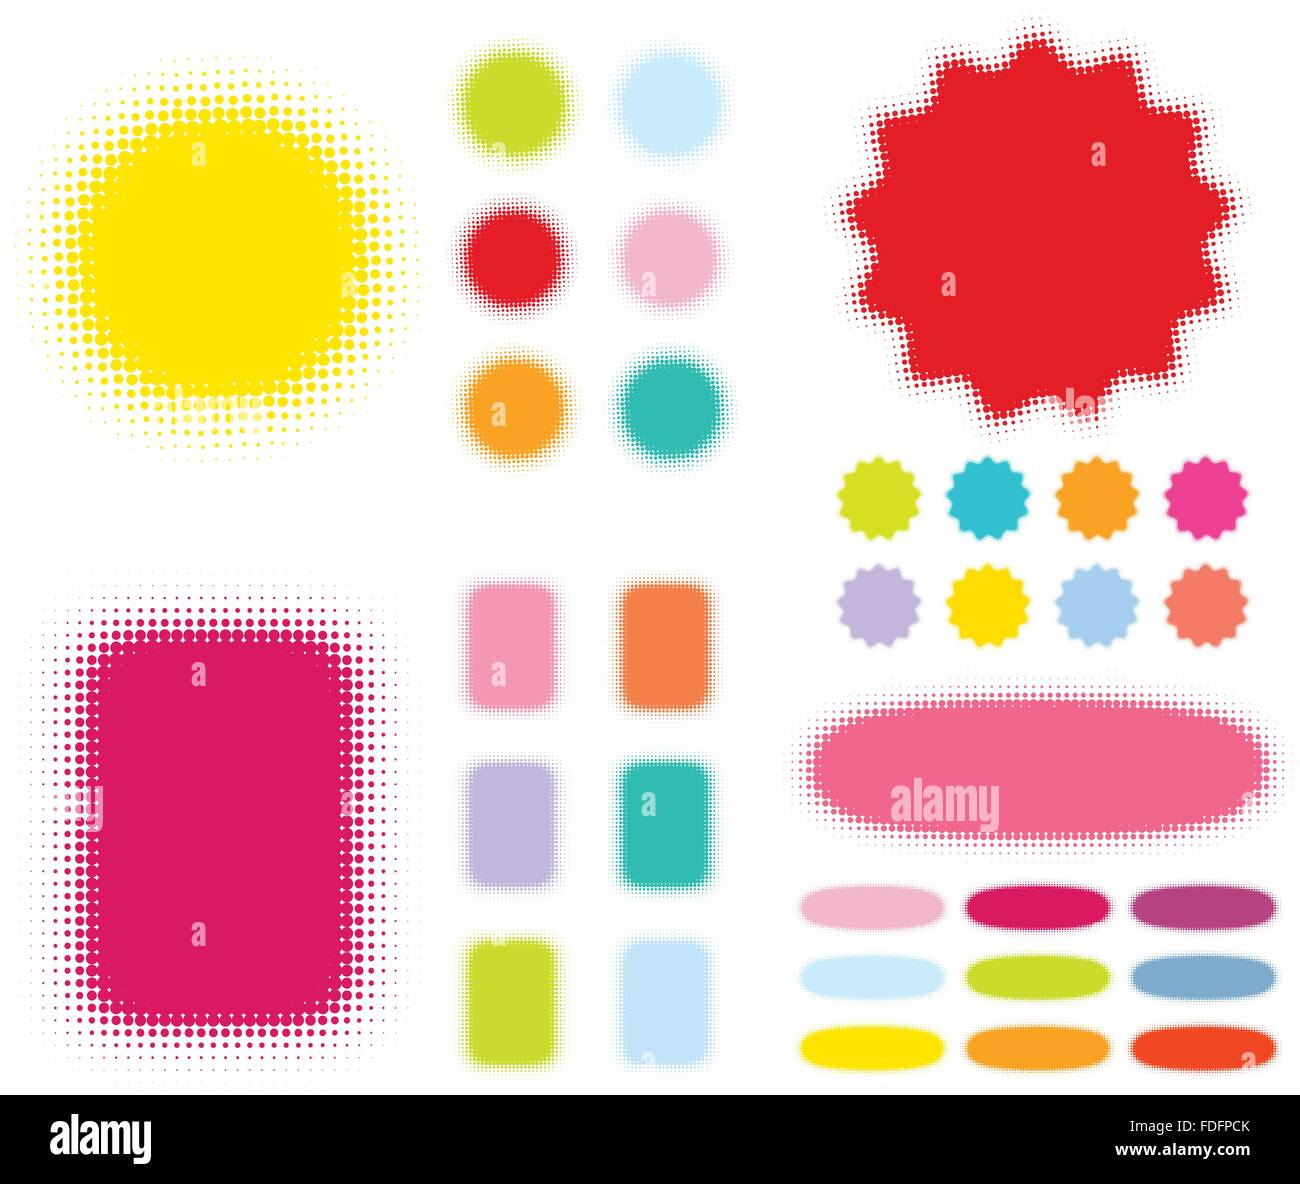 halftone shapes with color variations Stock Vector